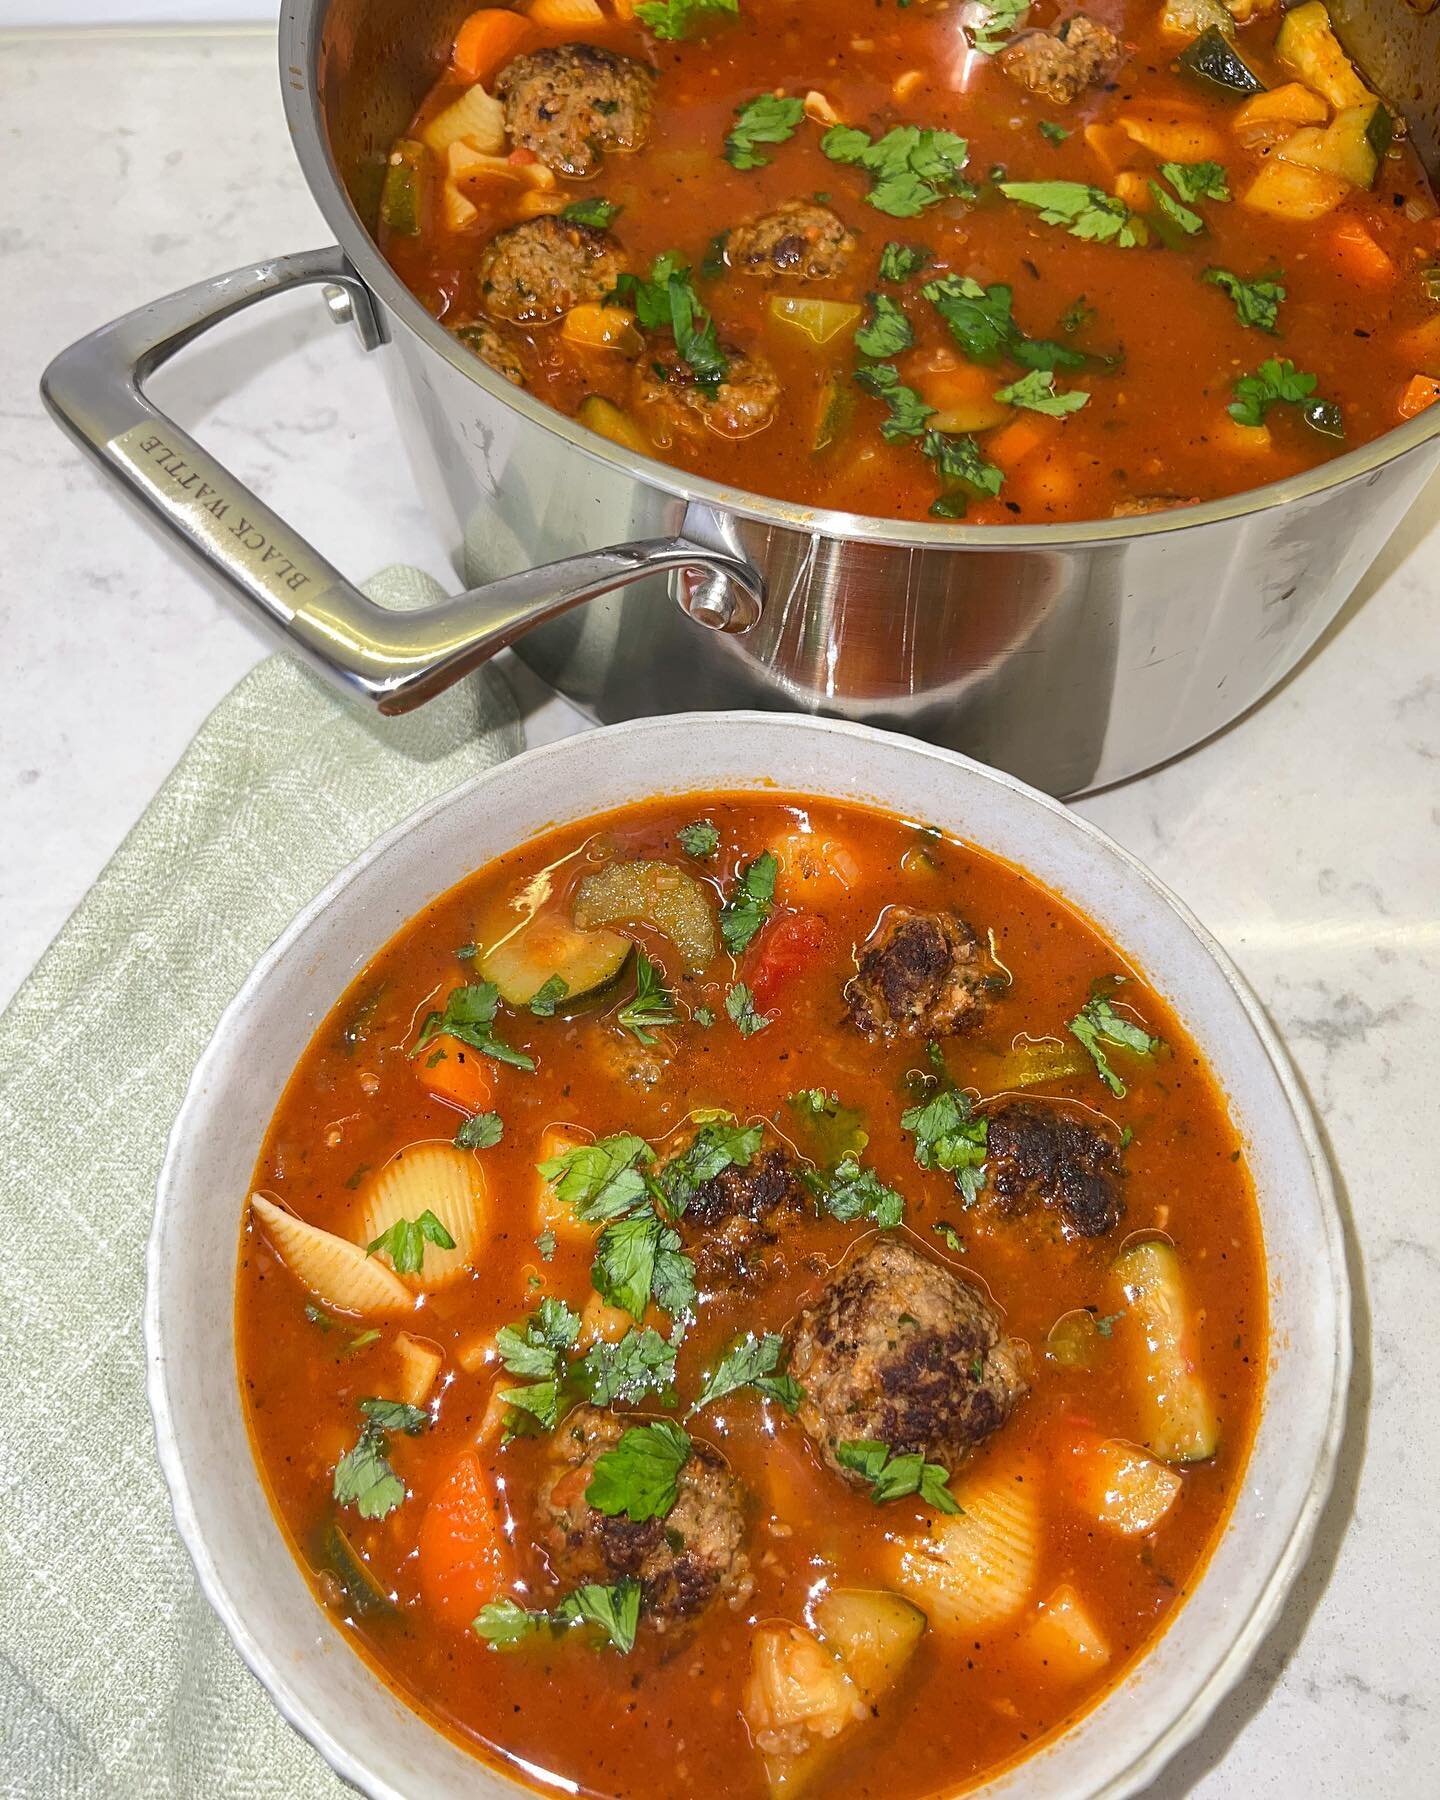 Meatball minestrone, the perfect soup for this chilly weather made in the @black_wattle_cookware stew pot! Meatballs are the perfect addition to a minestrone, as they soak up the soup and so yummy when you bite into them! ⁣
⁣
This is a recipe you won